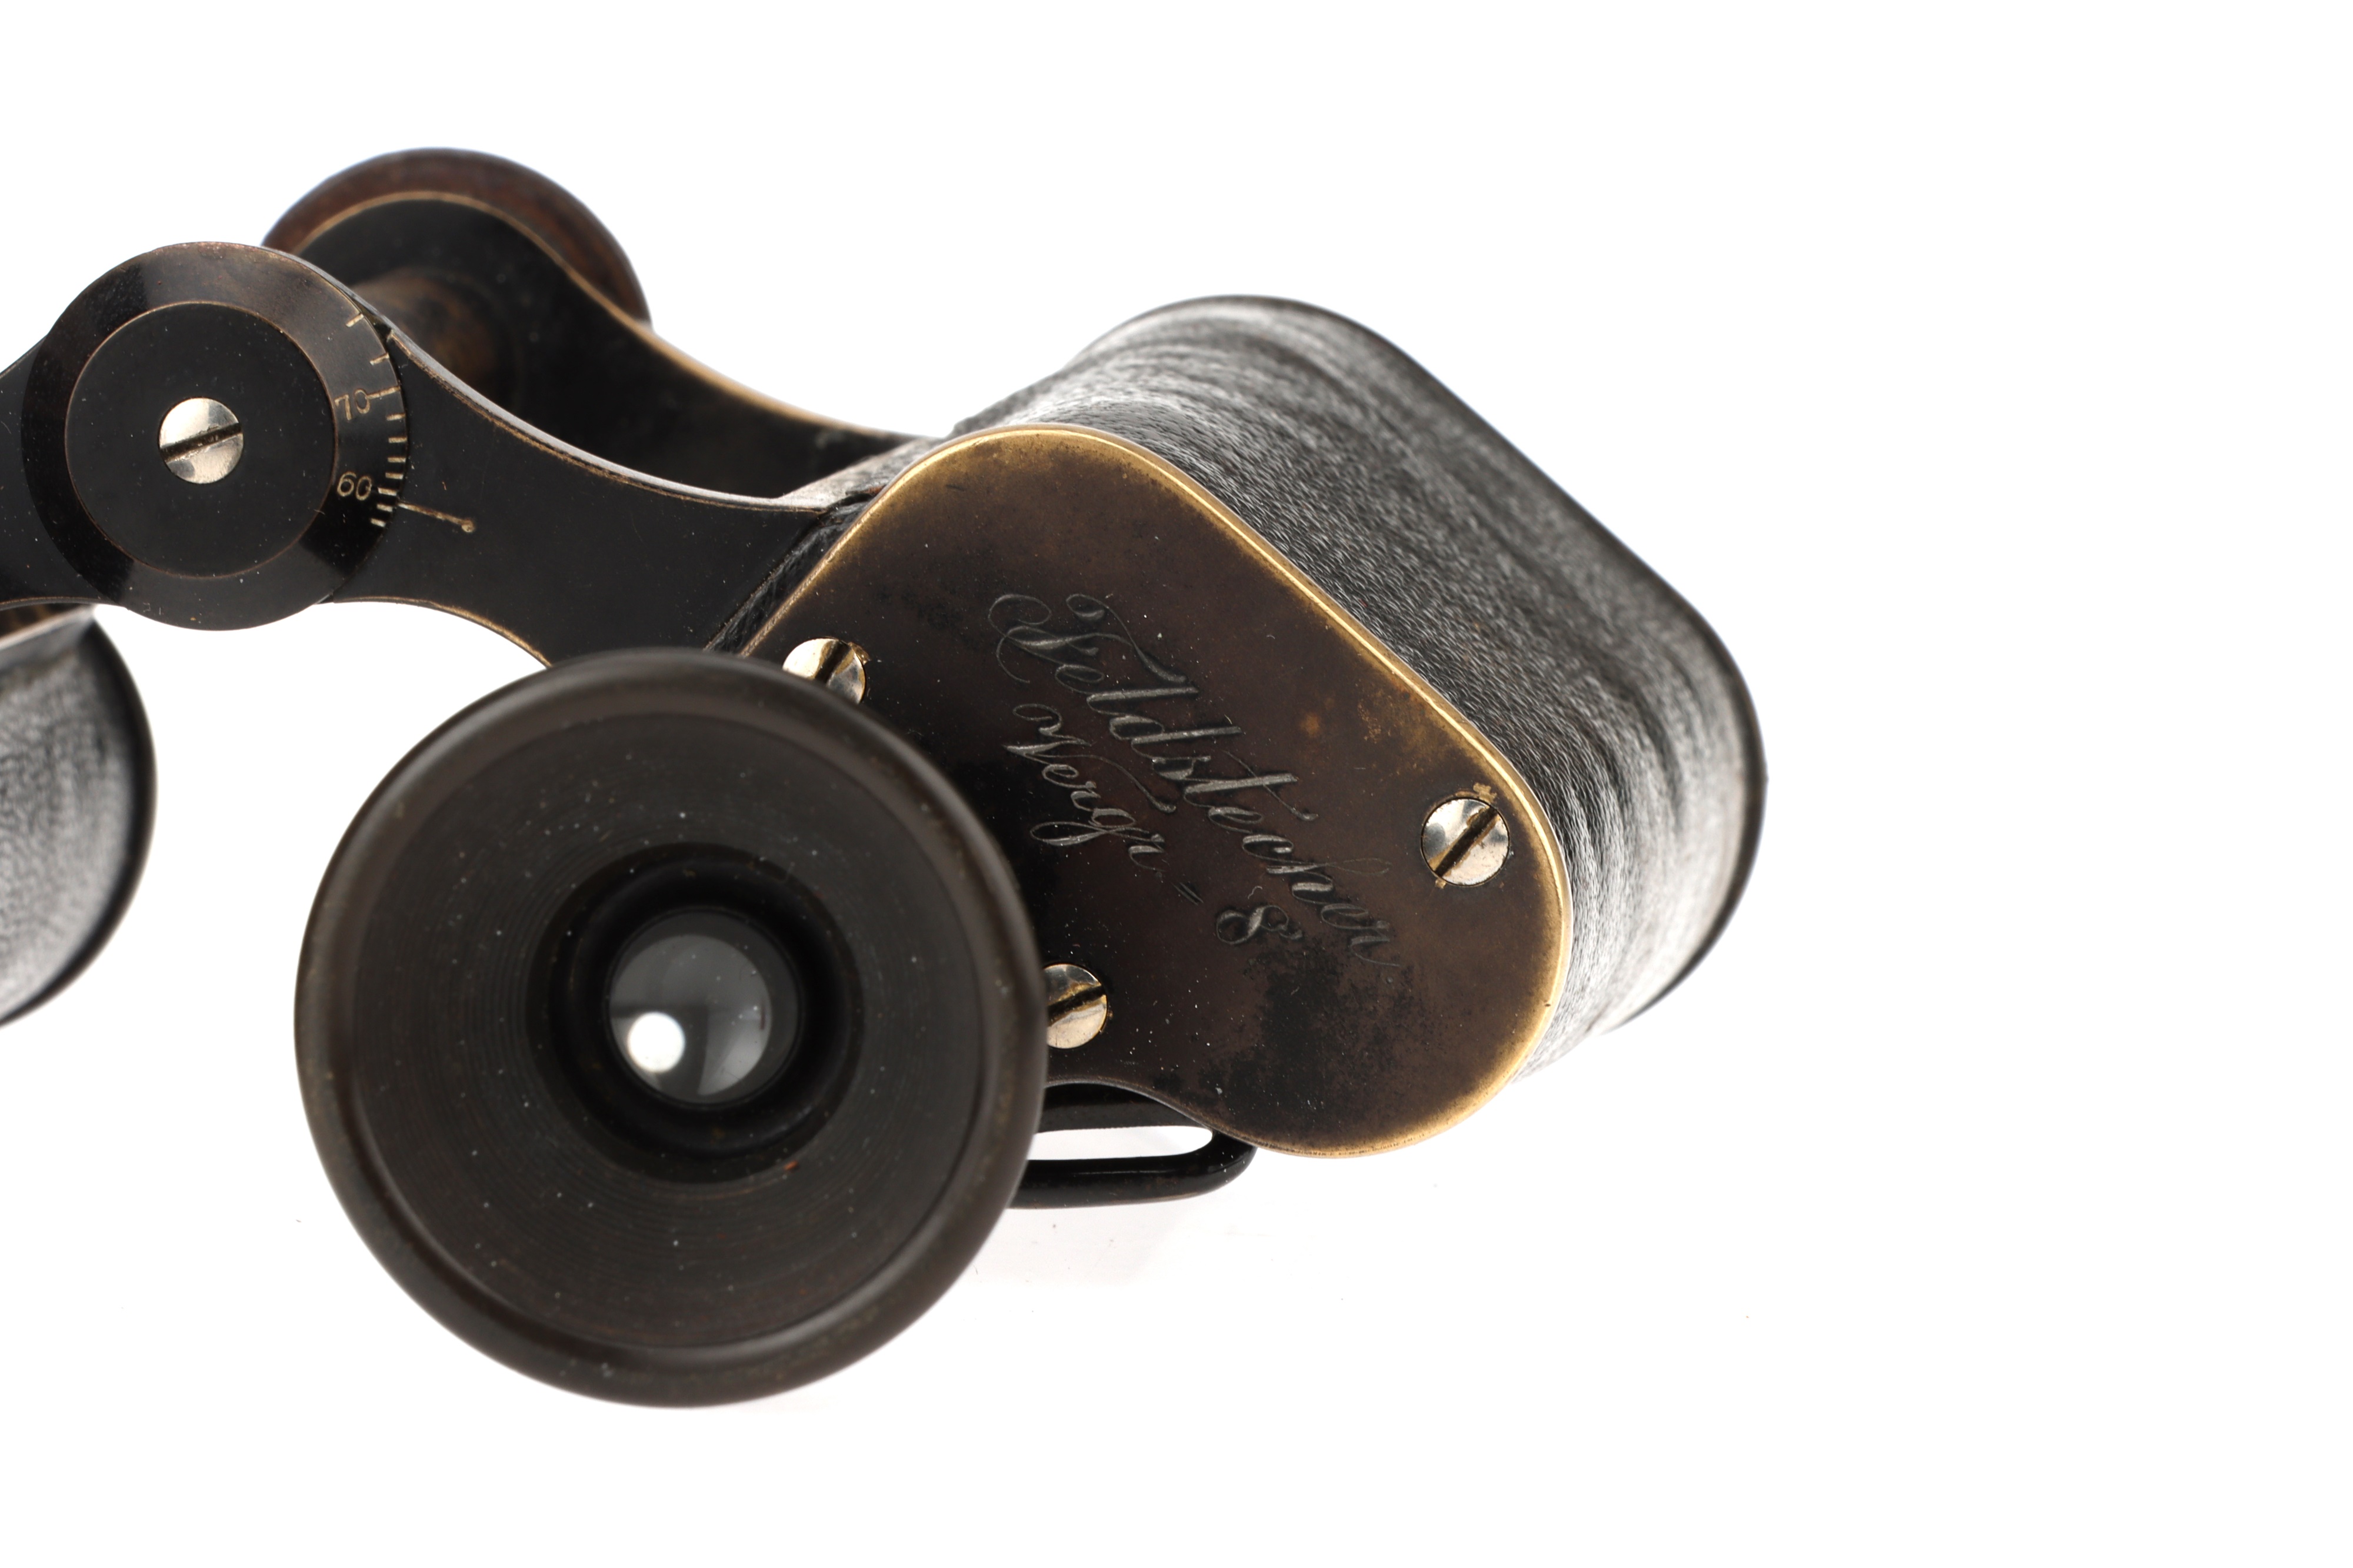 An Early Set of Binoculars By Zeiss - Image 6 of 6